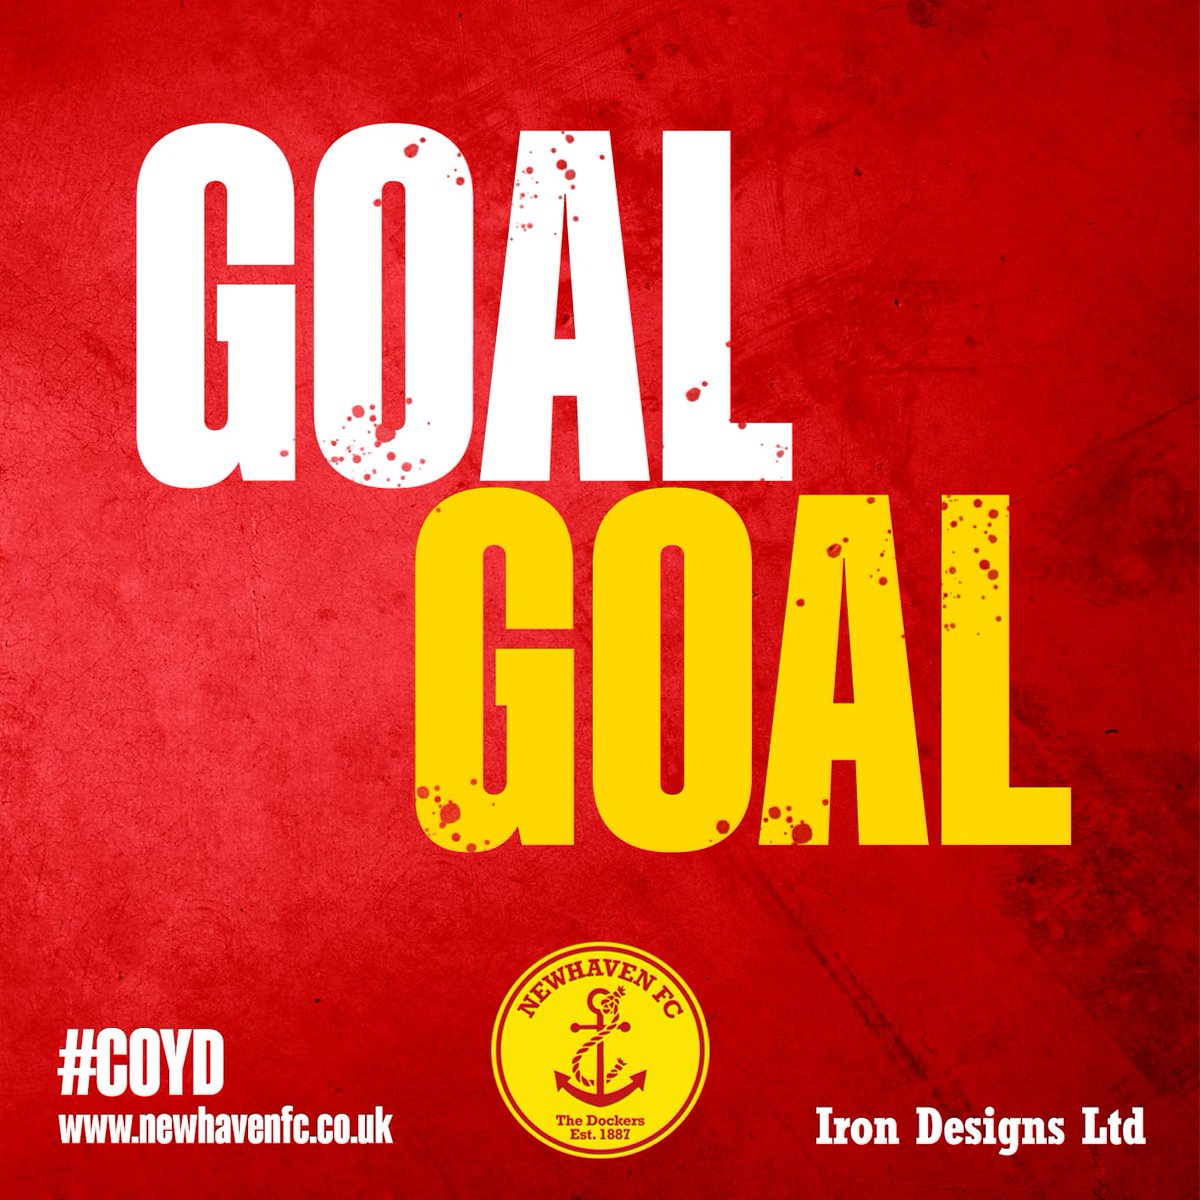 72 mins It's a fourth for Steyning. Cracking goal to be fair, smashed into the top corner from way outside the area. 0-4